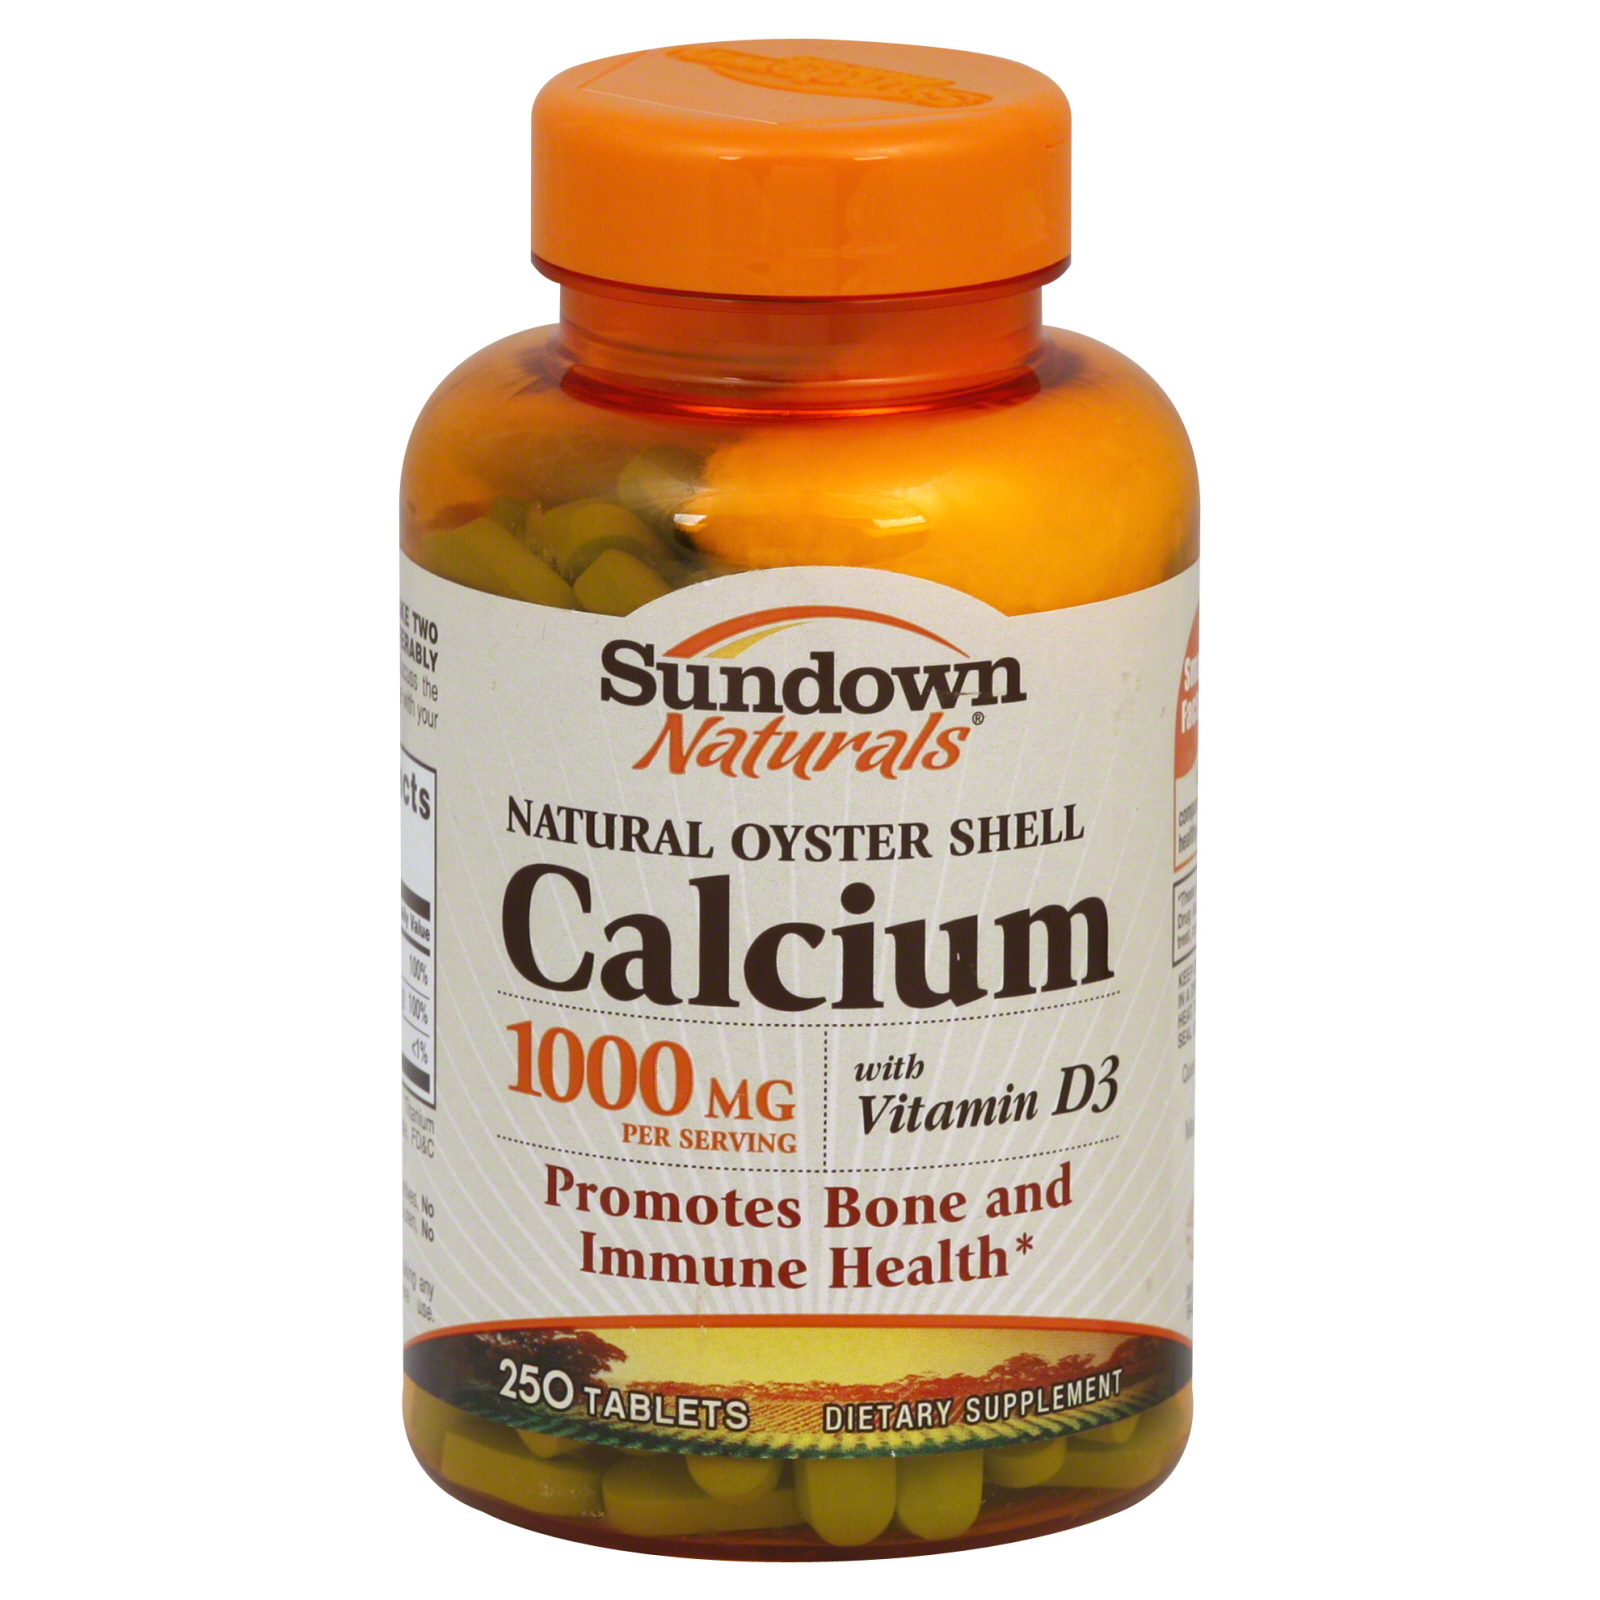 Sundown  Naturals Calcium, 1000 mg, with Vitamin D3, Tablets, 250 tablets